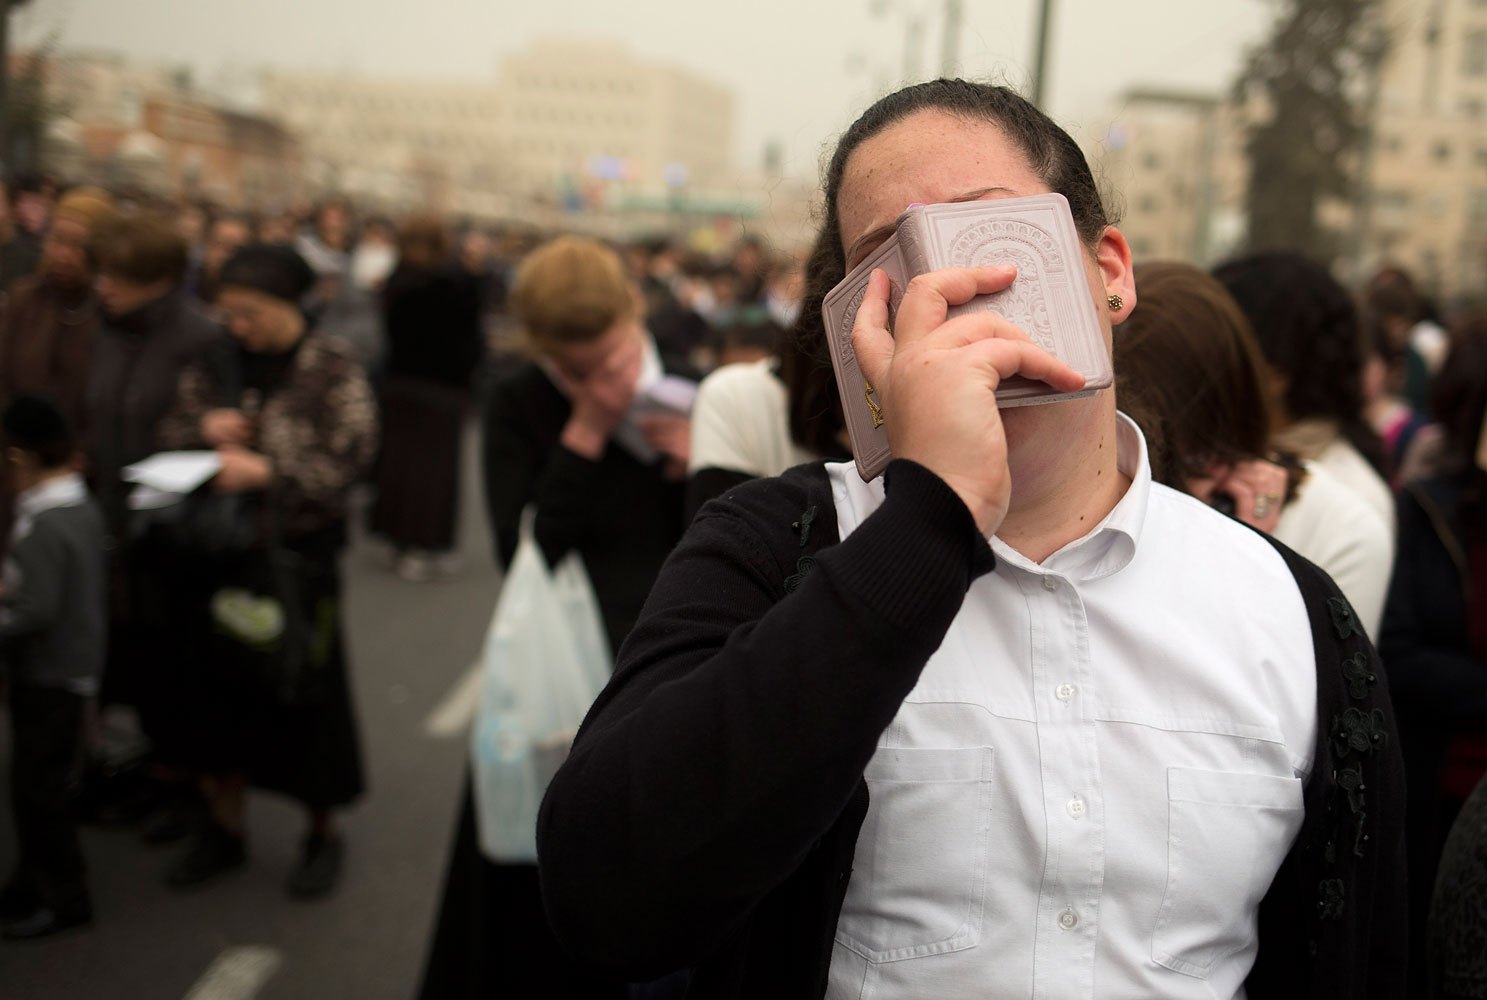 An ultra-Orthodox woman prays during a mass protest in Jerusalem, March 2, 2014.